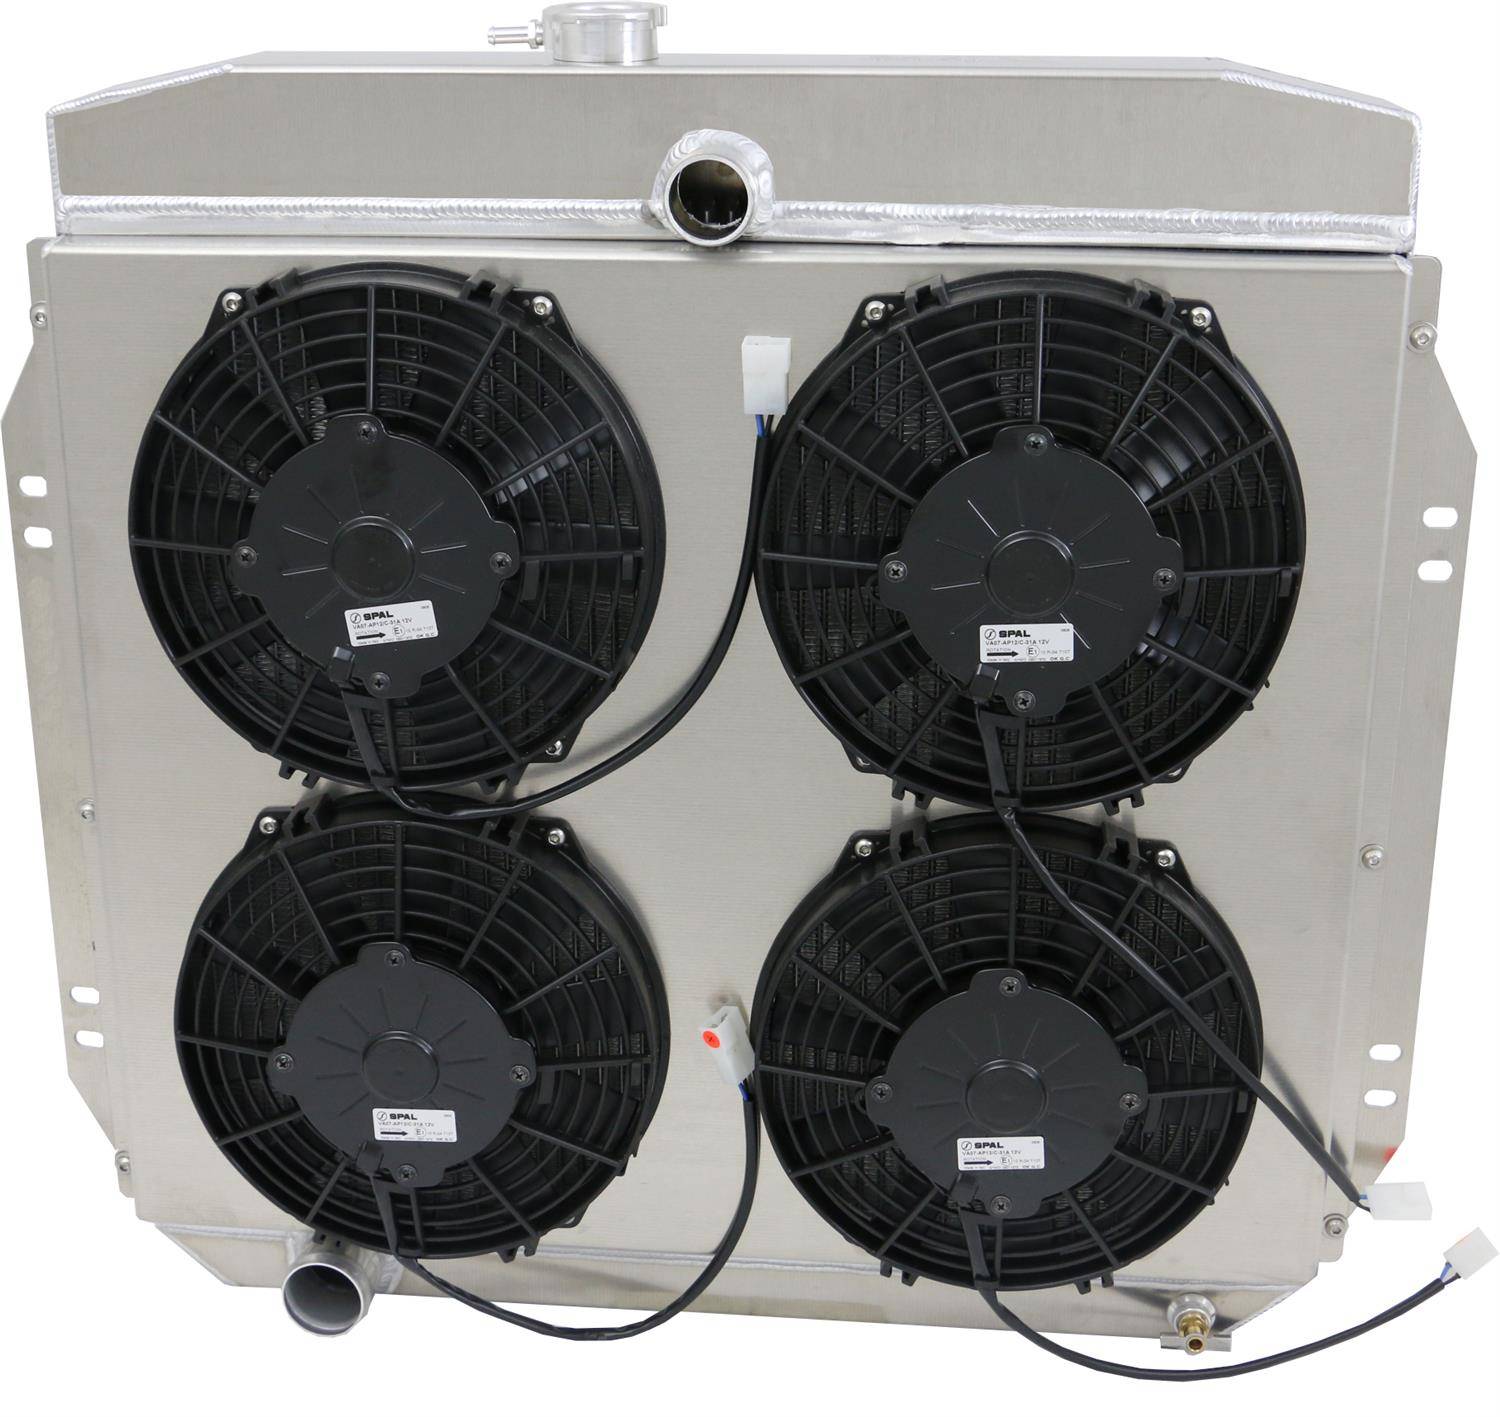 Wizard Cooling Inc - Wizard Cooling - 1957-1960 Ford Truck Aluminum Radiator (w/ 4-Spal Low Profile Fans) - 98505-114LP